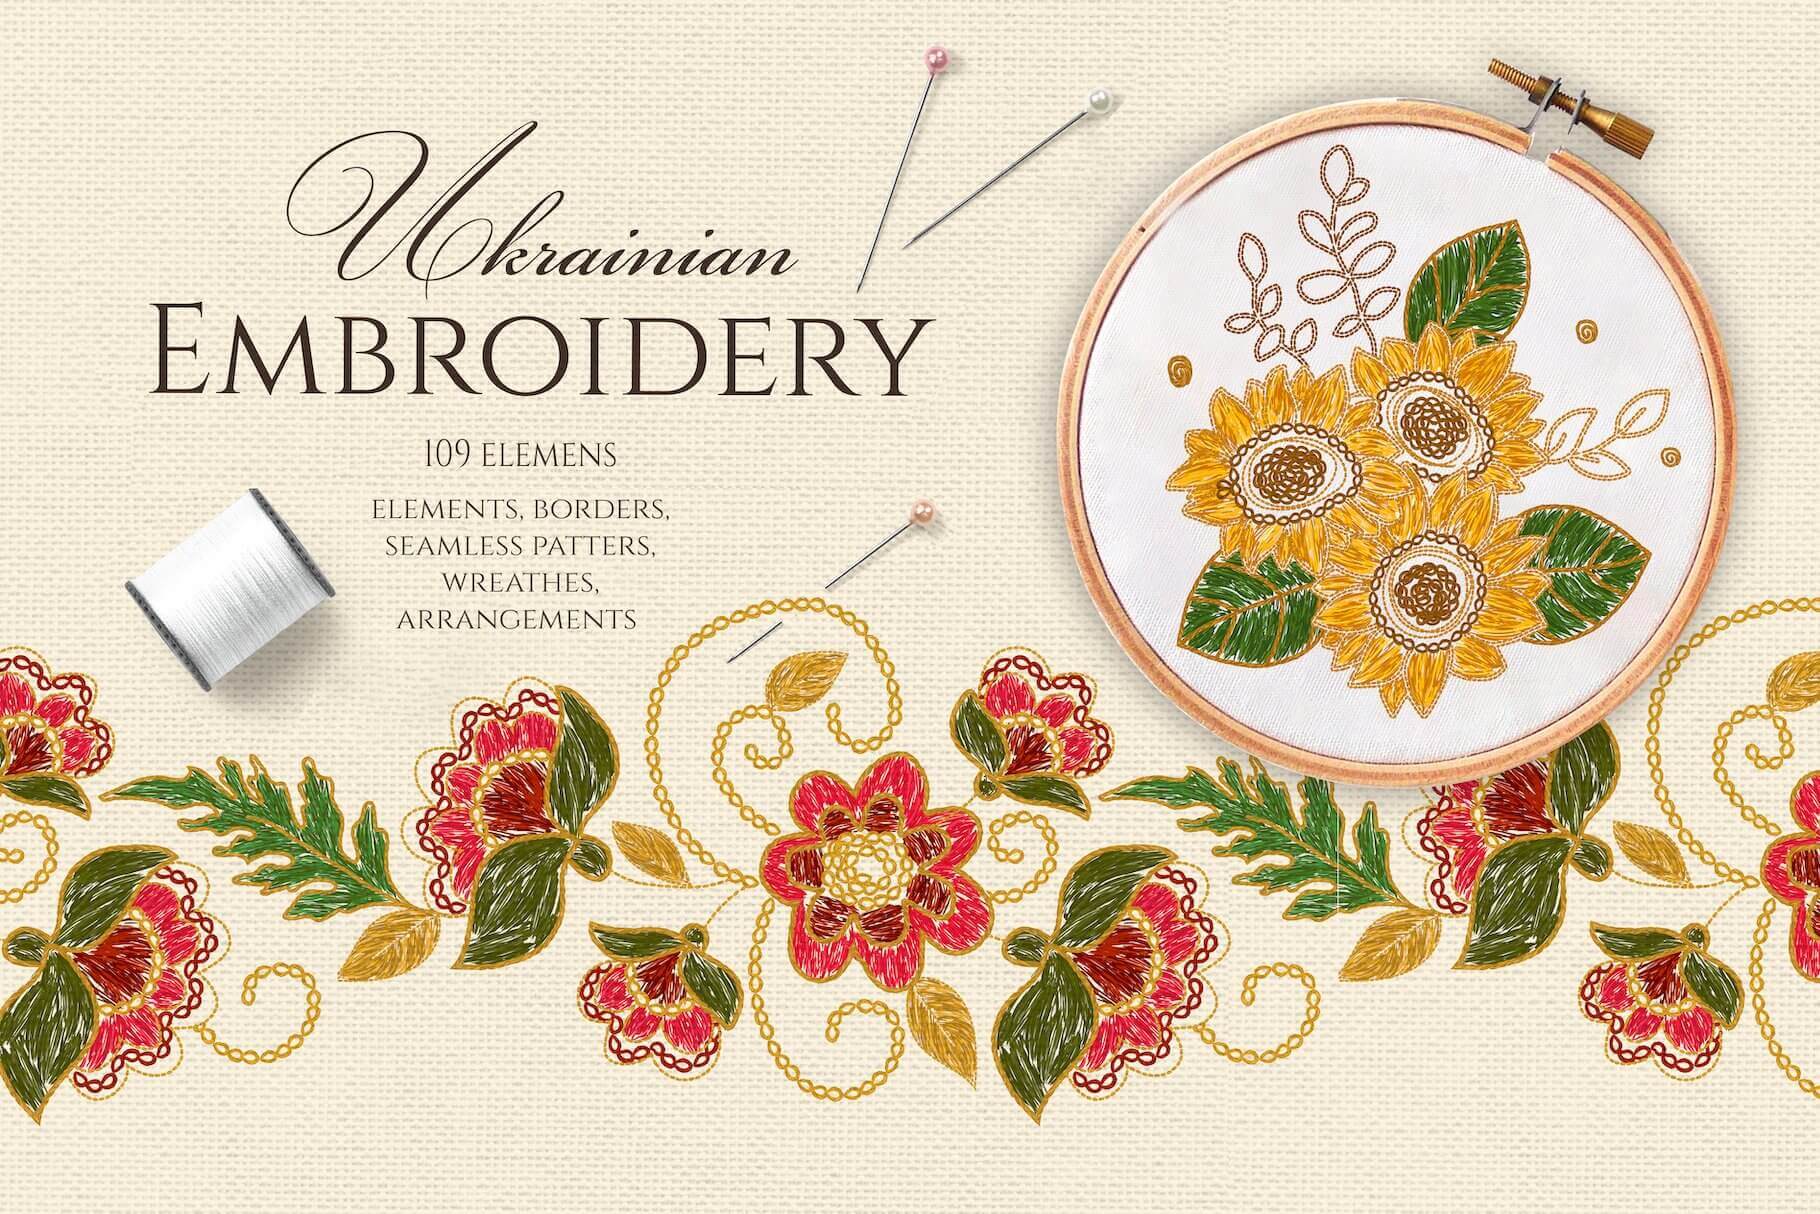 109 elements, borders, seamless patterns, wreathes, arrangements of the ukrainian embroidery.